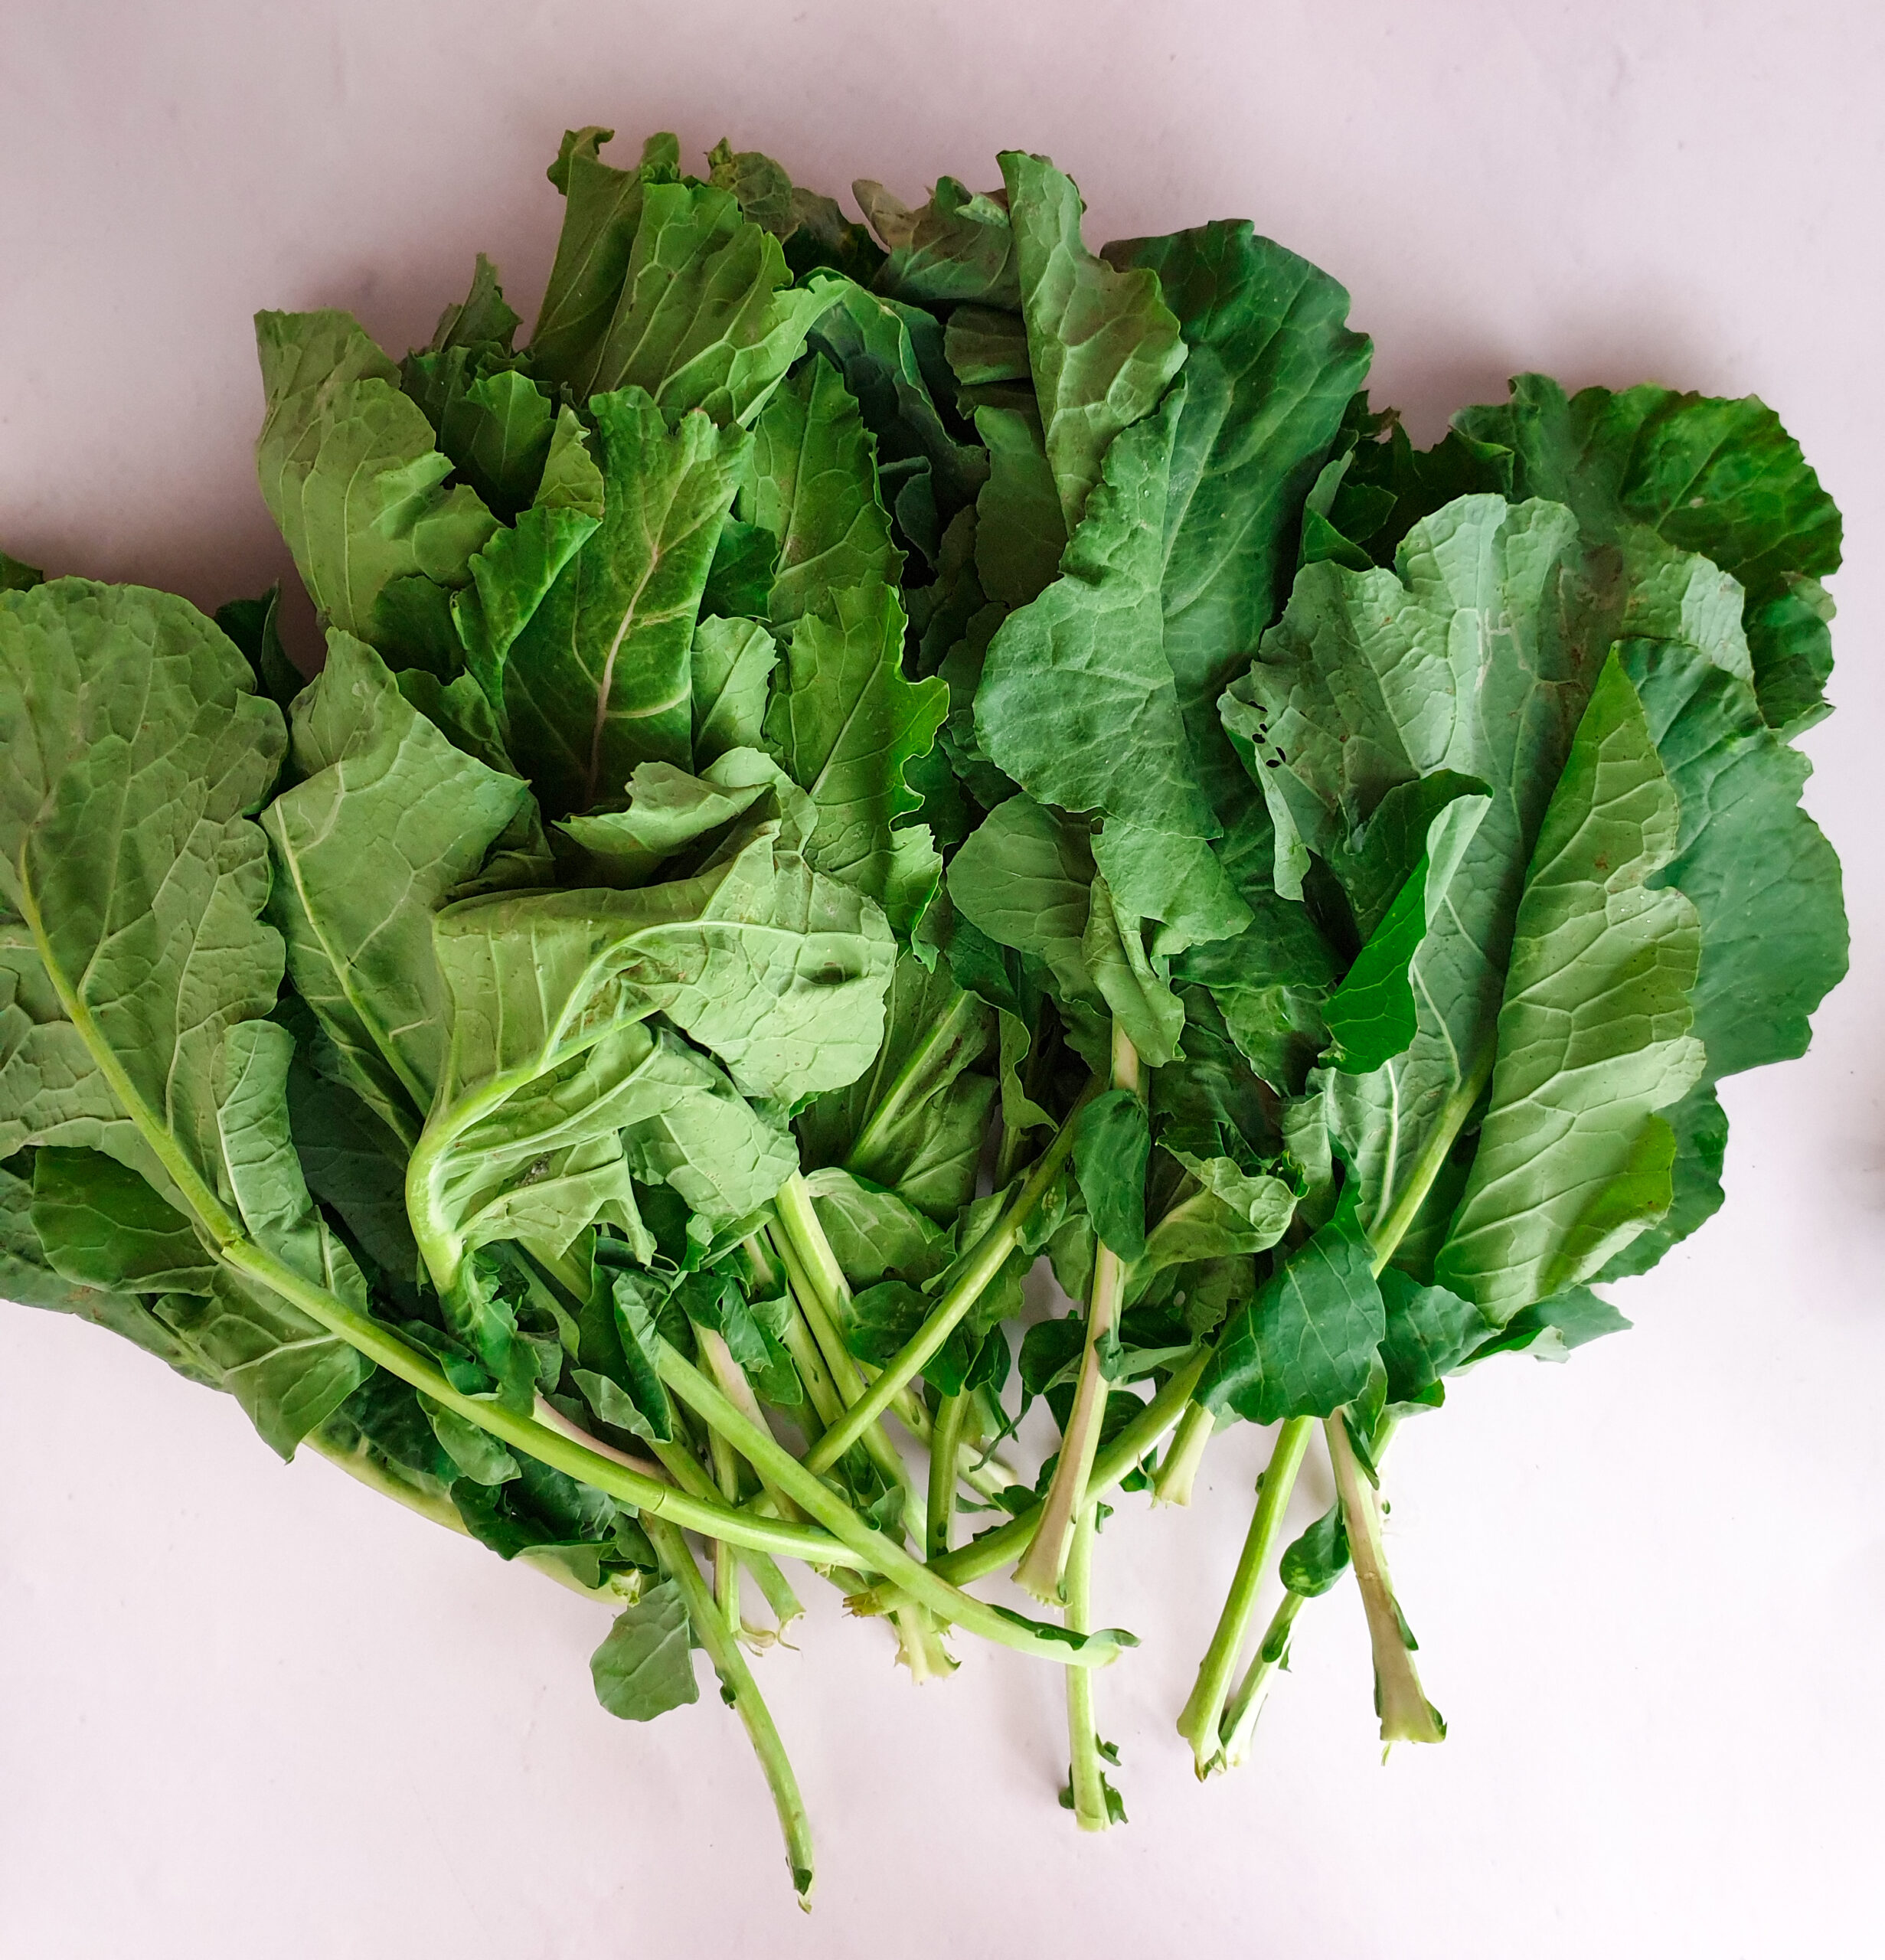 How to store leafy greens